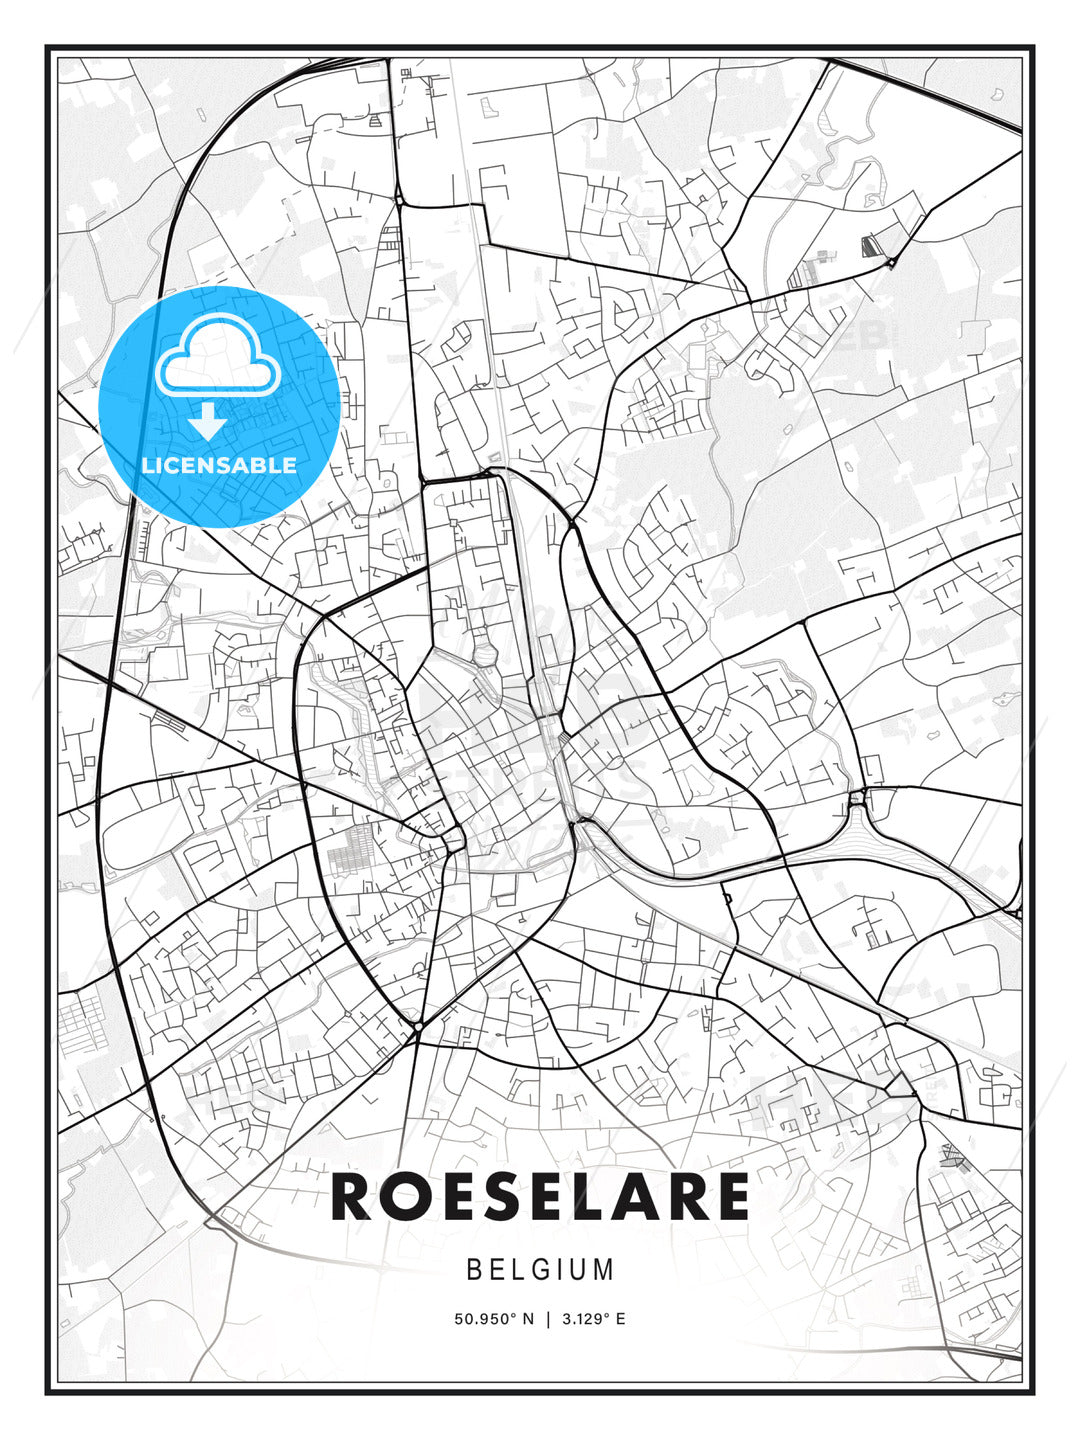 Roeselare, Belgium, Modern Print Template in Various Formats - HEBSTREITS Sketches